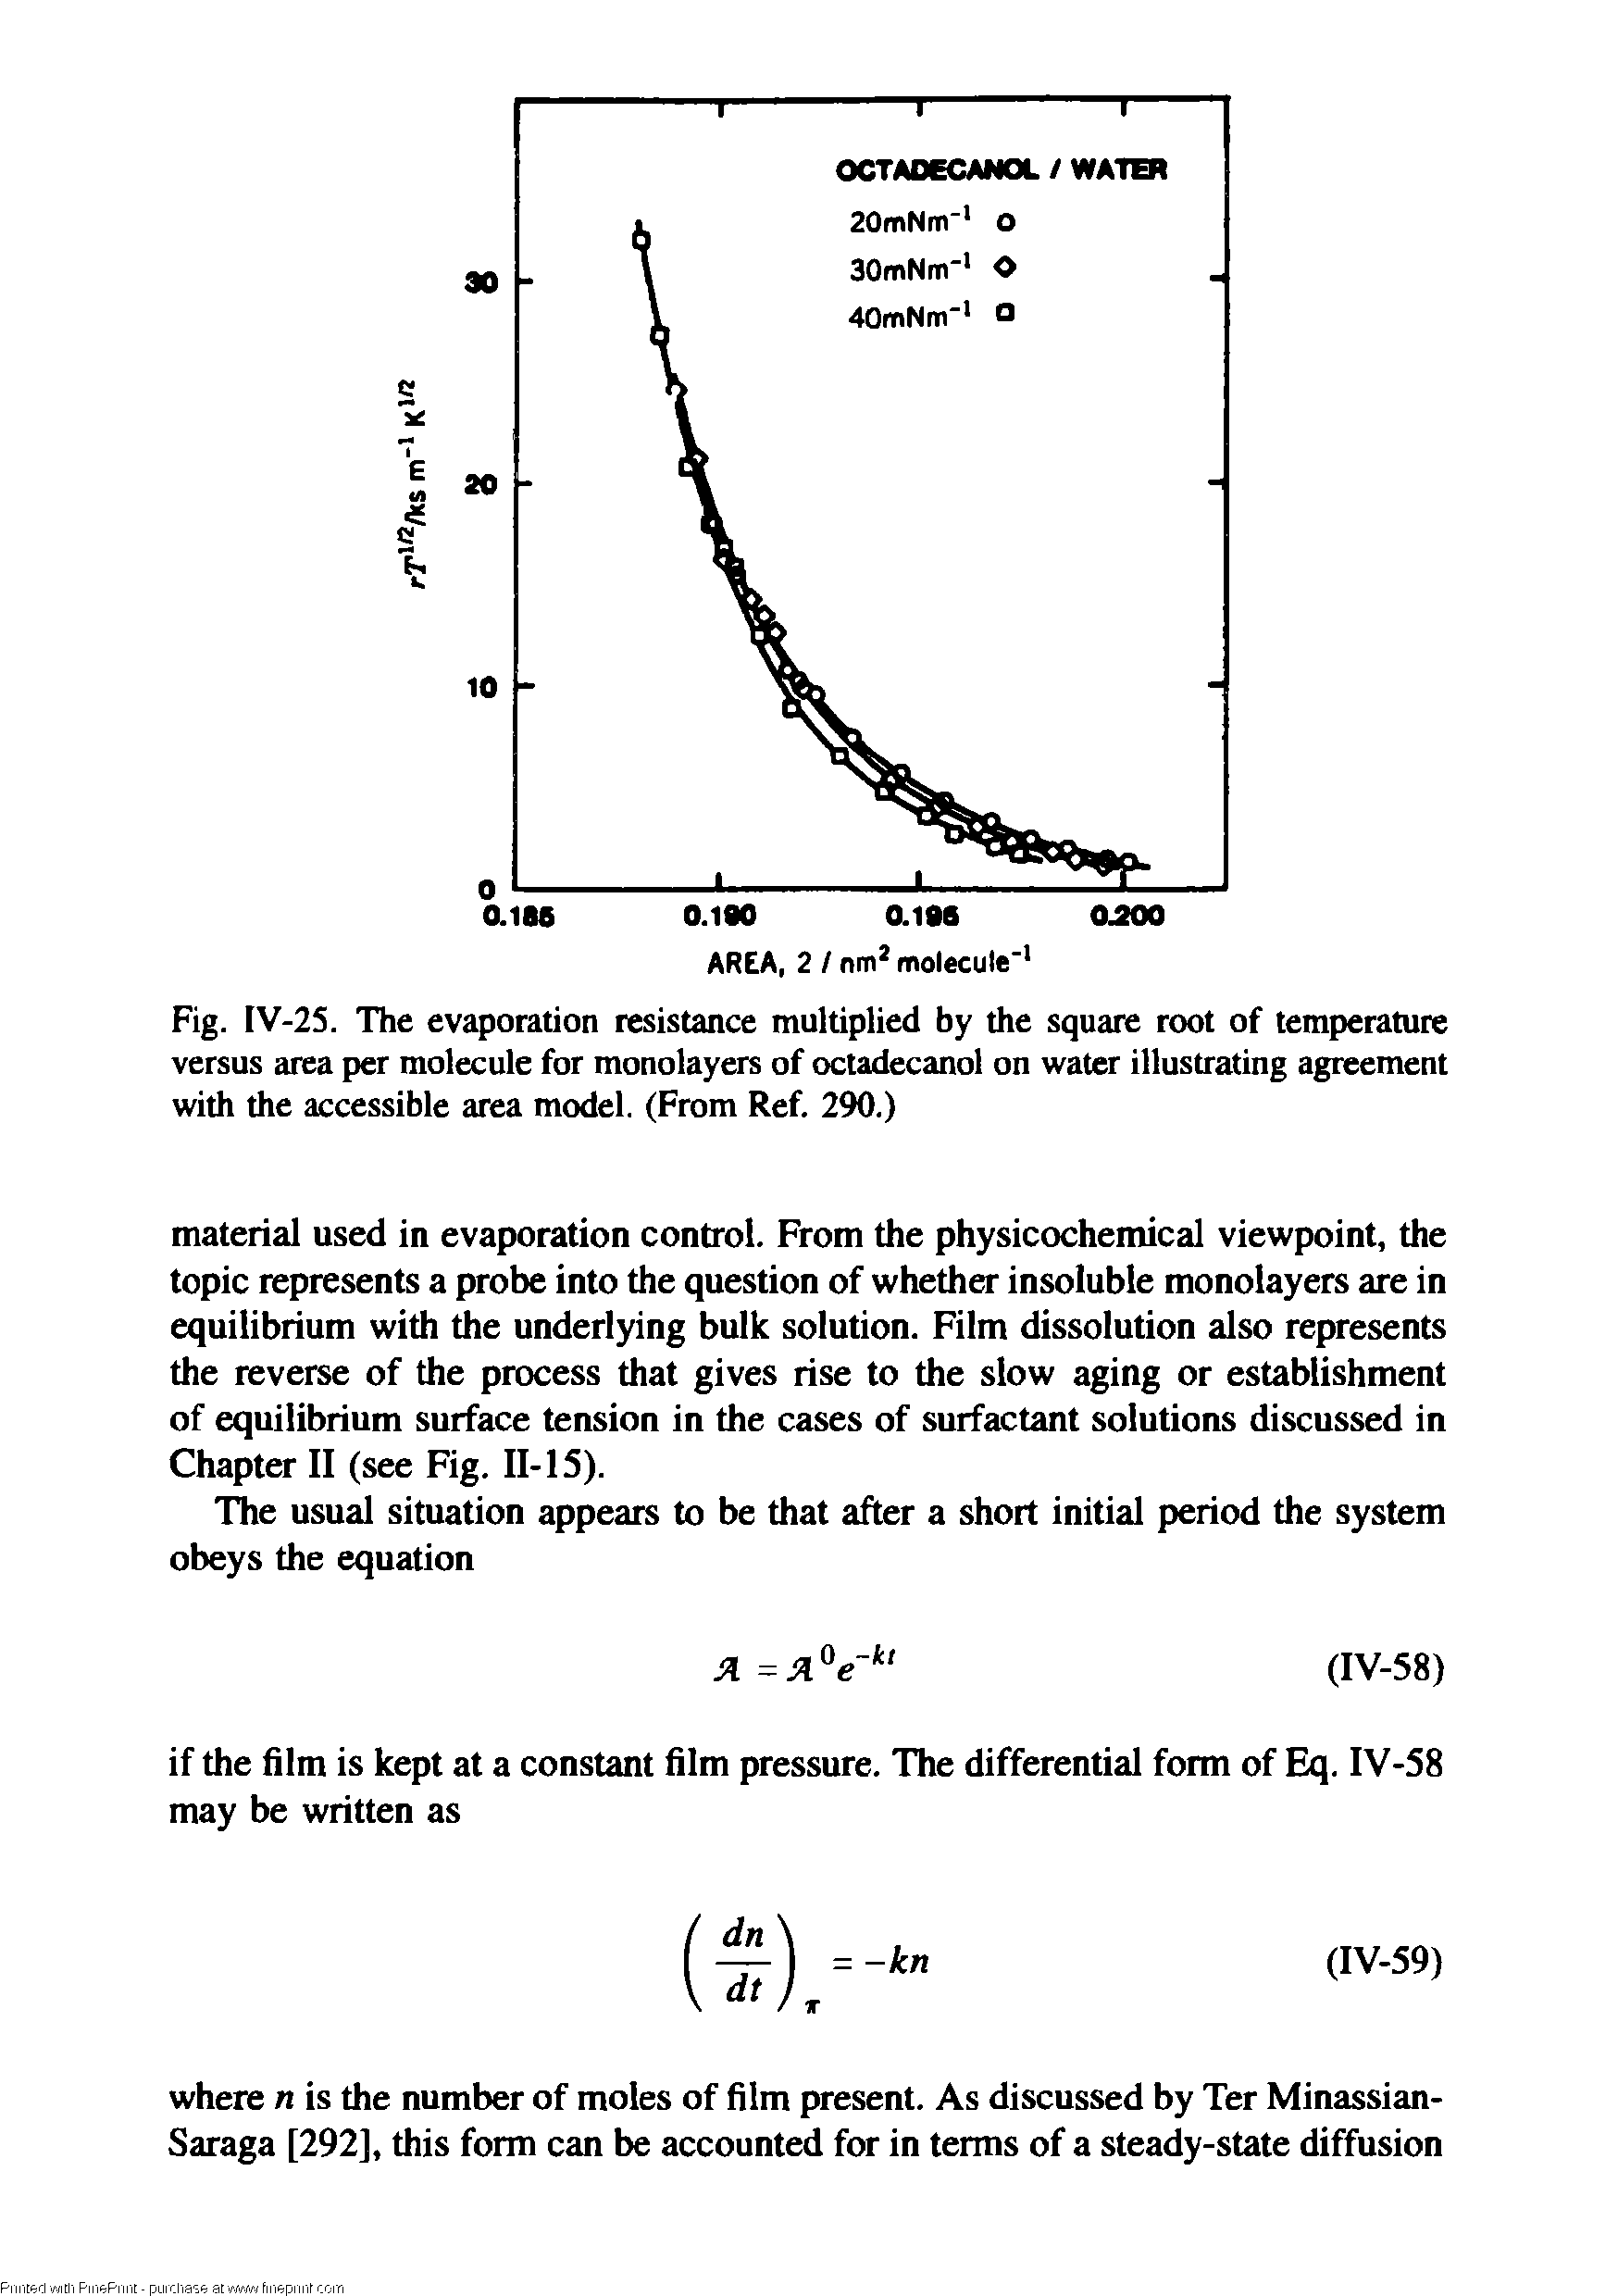 Fig. IV-25. The evaporation resistance multiplied by the square root of temperature versus area per molecule for monolayers of octadecanol on water illustrating agreement with the accessible area model. (From Ref. 290.)...